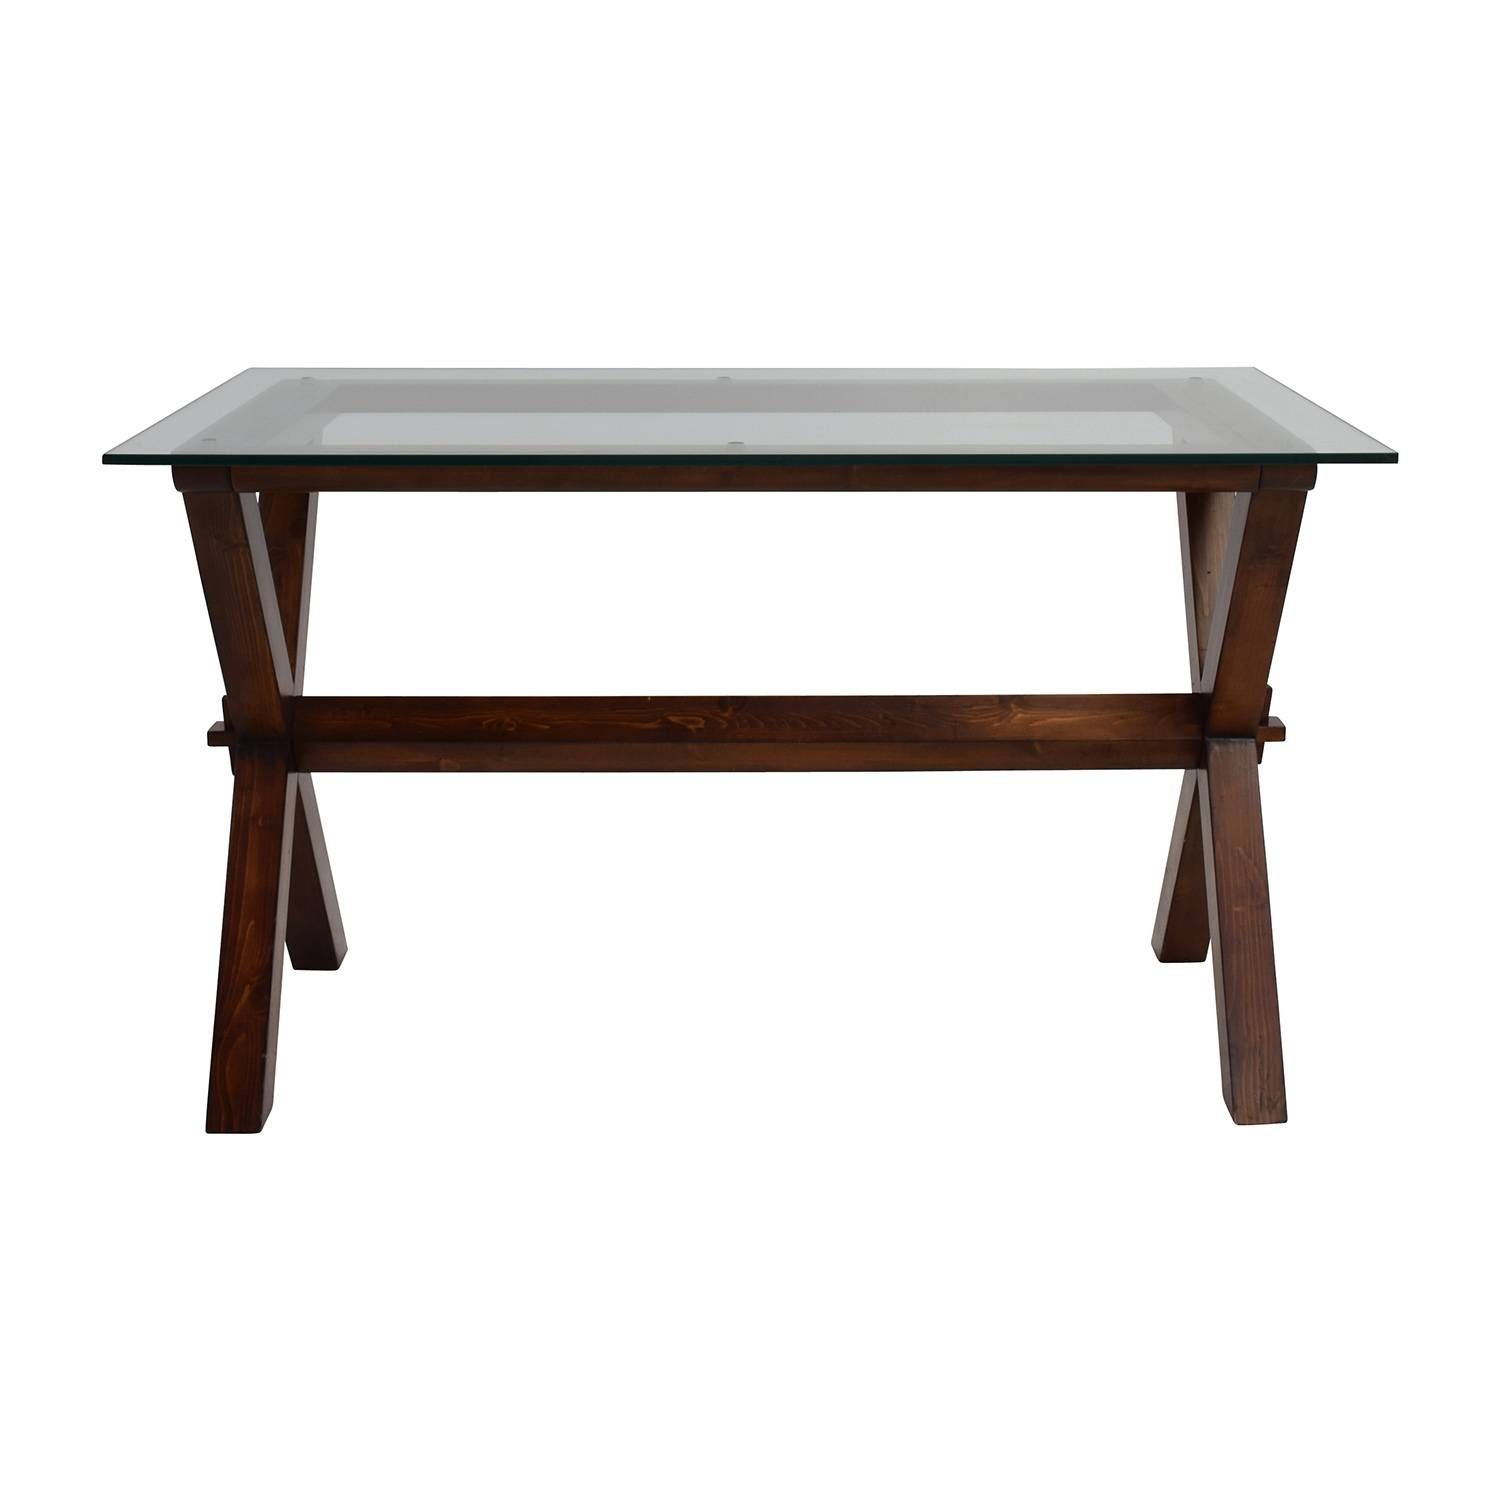 64% Off – Pottery Barn Pottery Barn Ava Glass And Wood Desk / Tables Regarding Ava Coffee Tables (View 6 of 30)